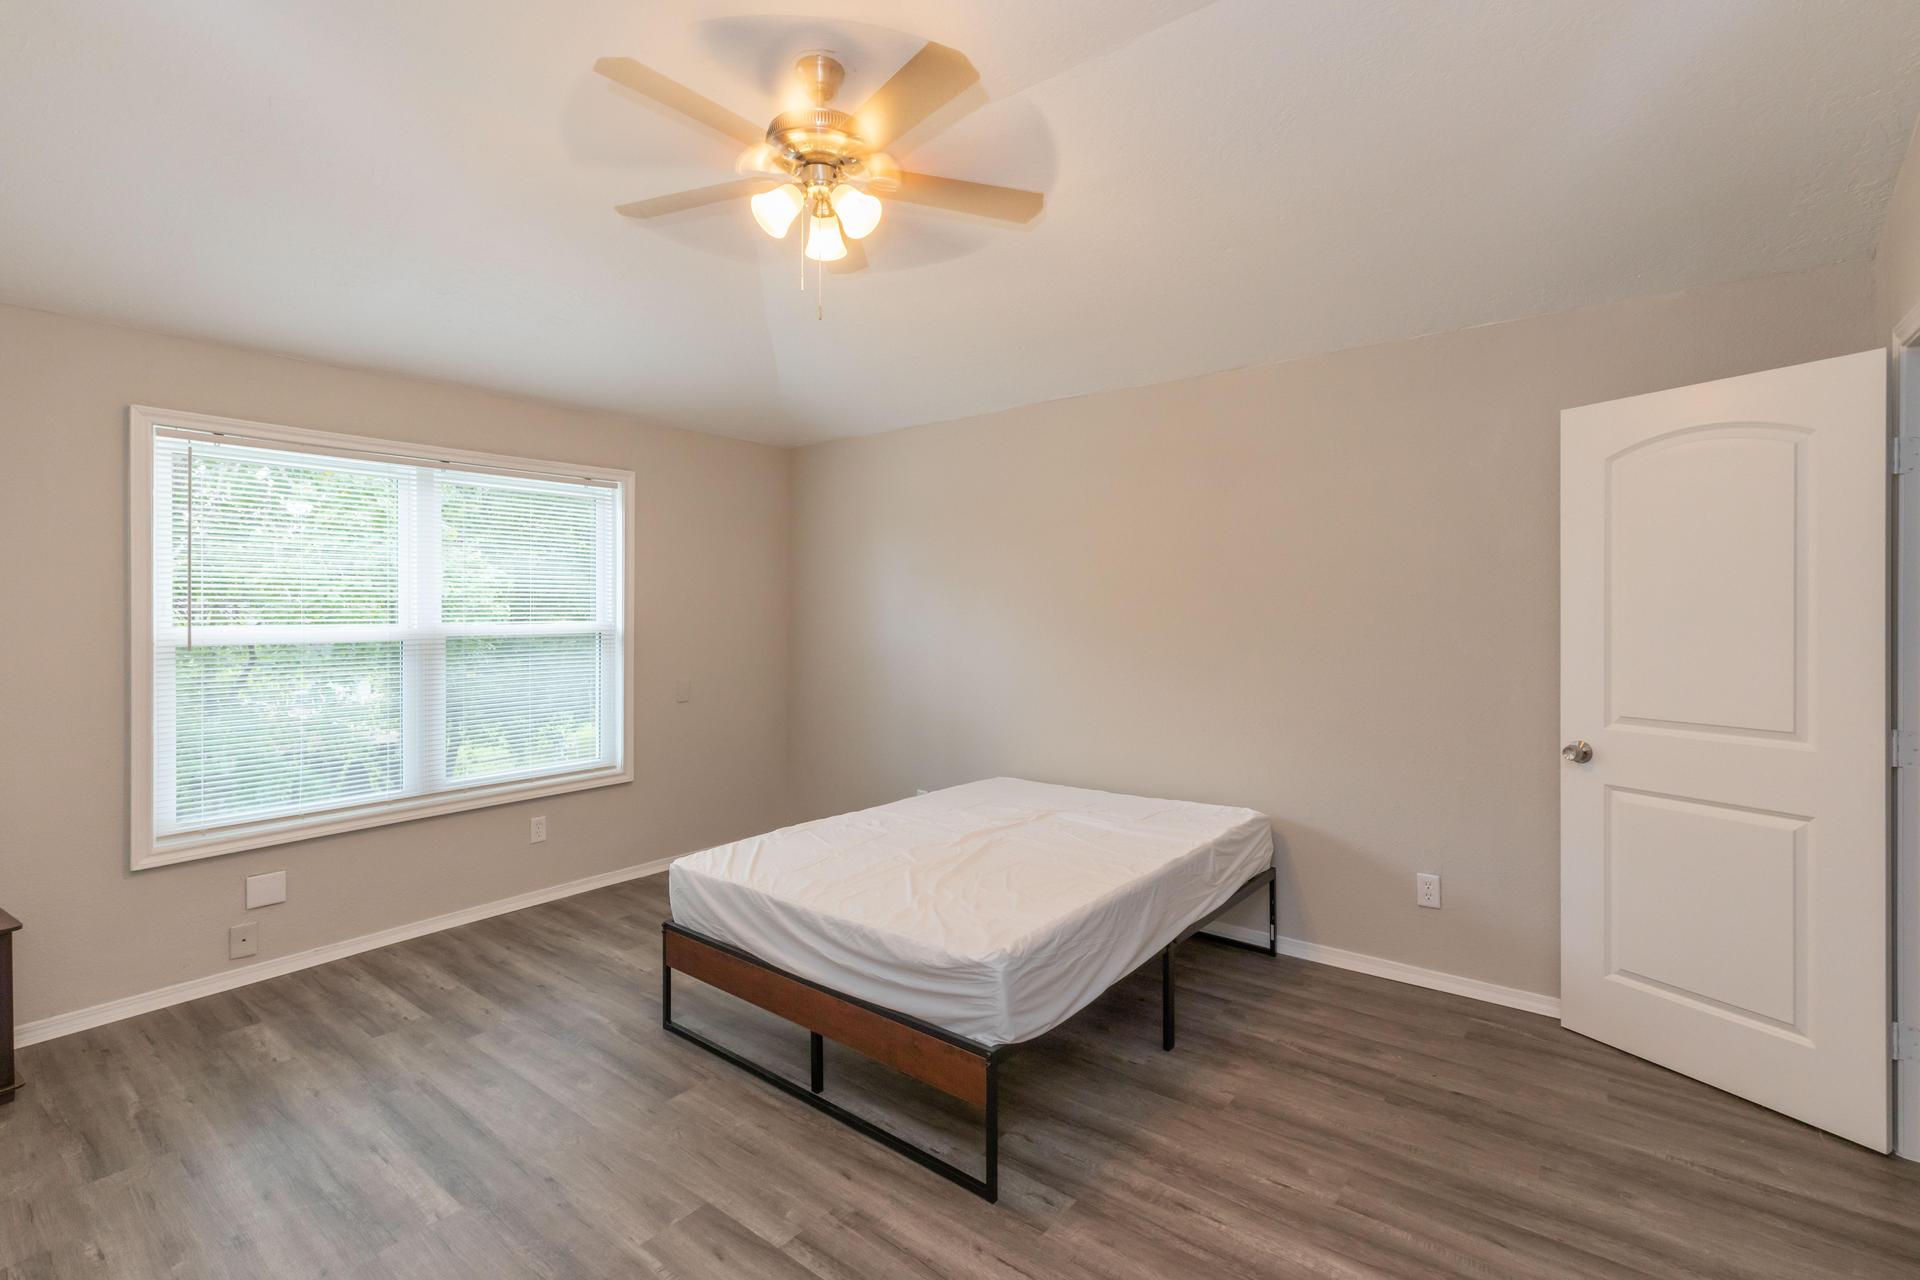 Spacious bedroom with high ceiling. 2nd floor